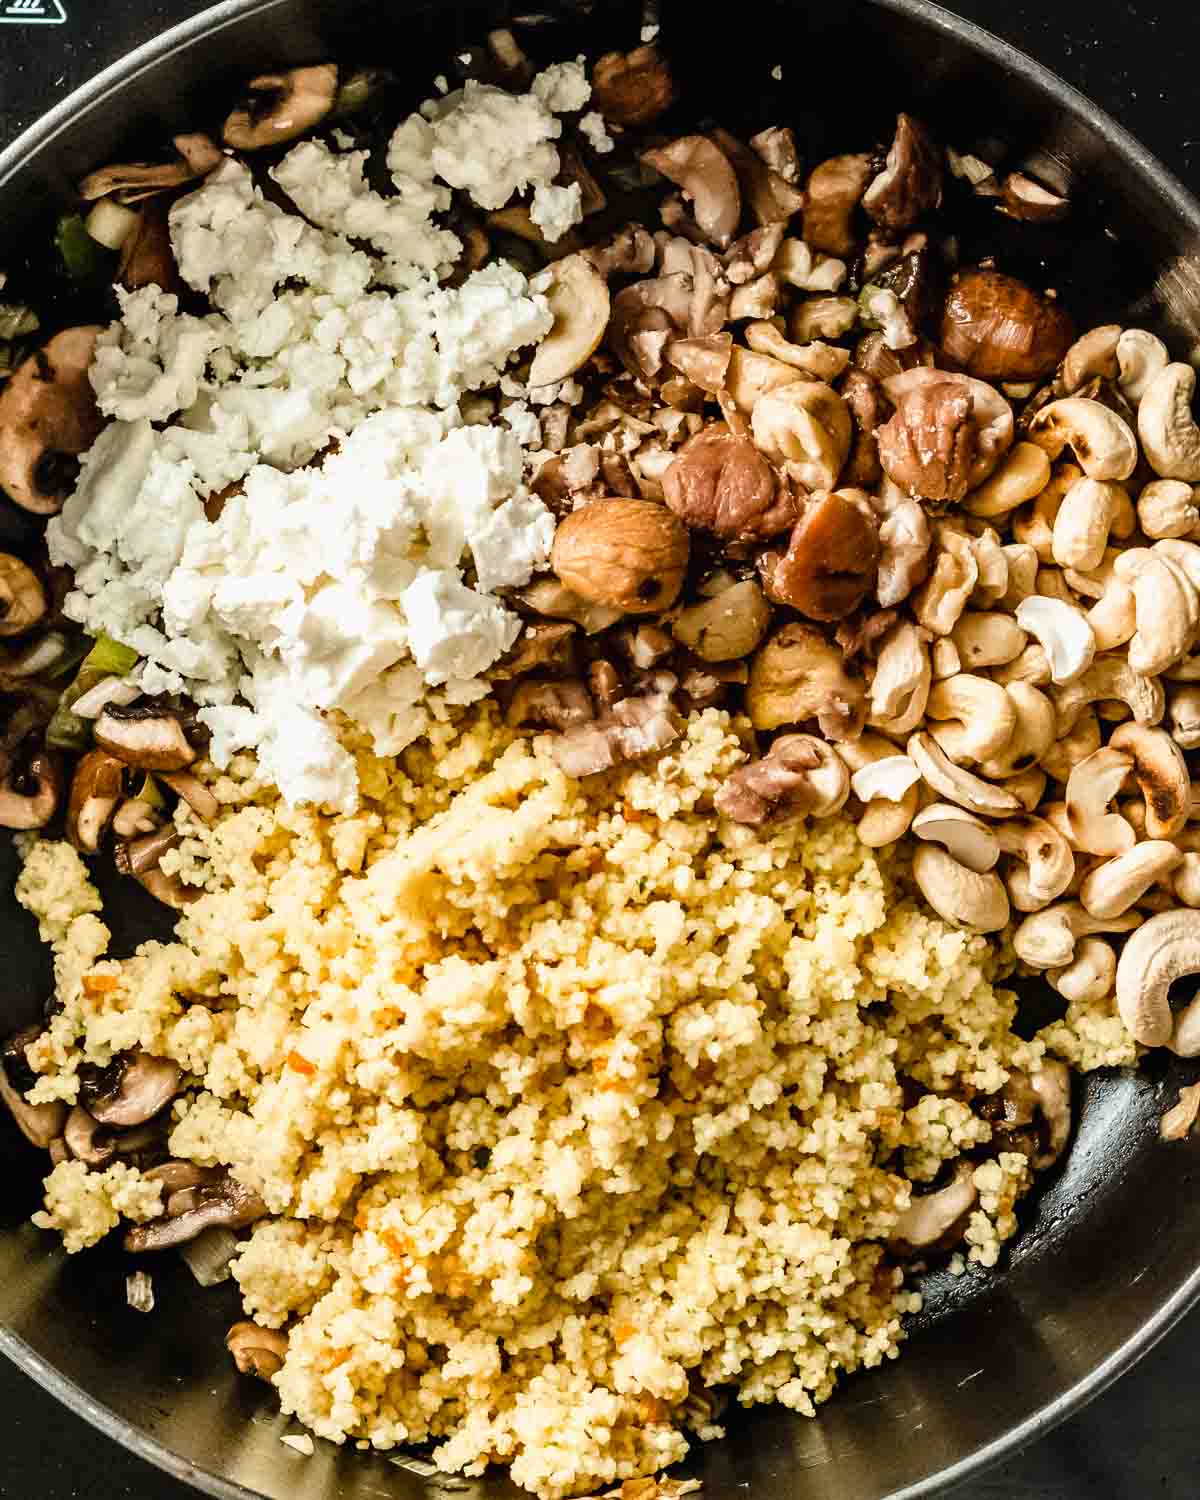 cooked couscous, feta, cooked chestnuts and toasted cashews added to the mushroom mix in the pan.